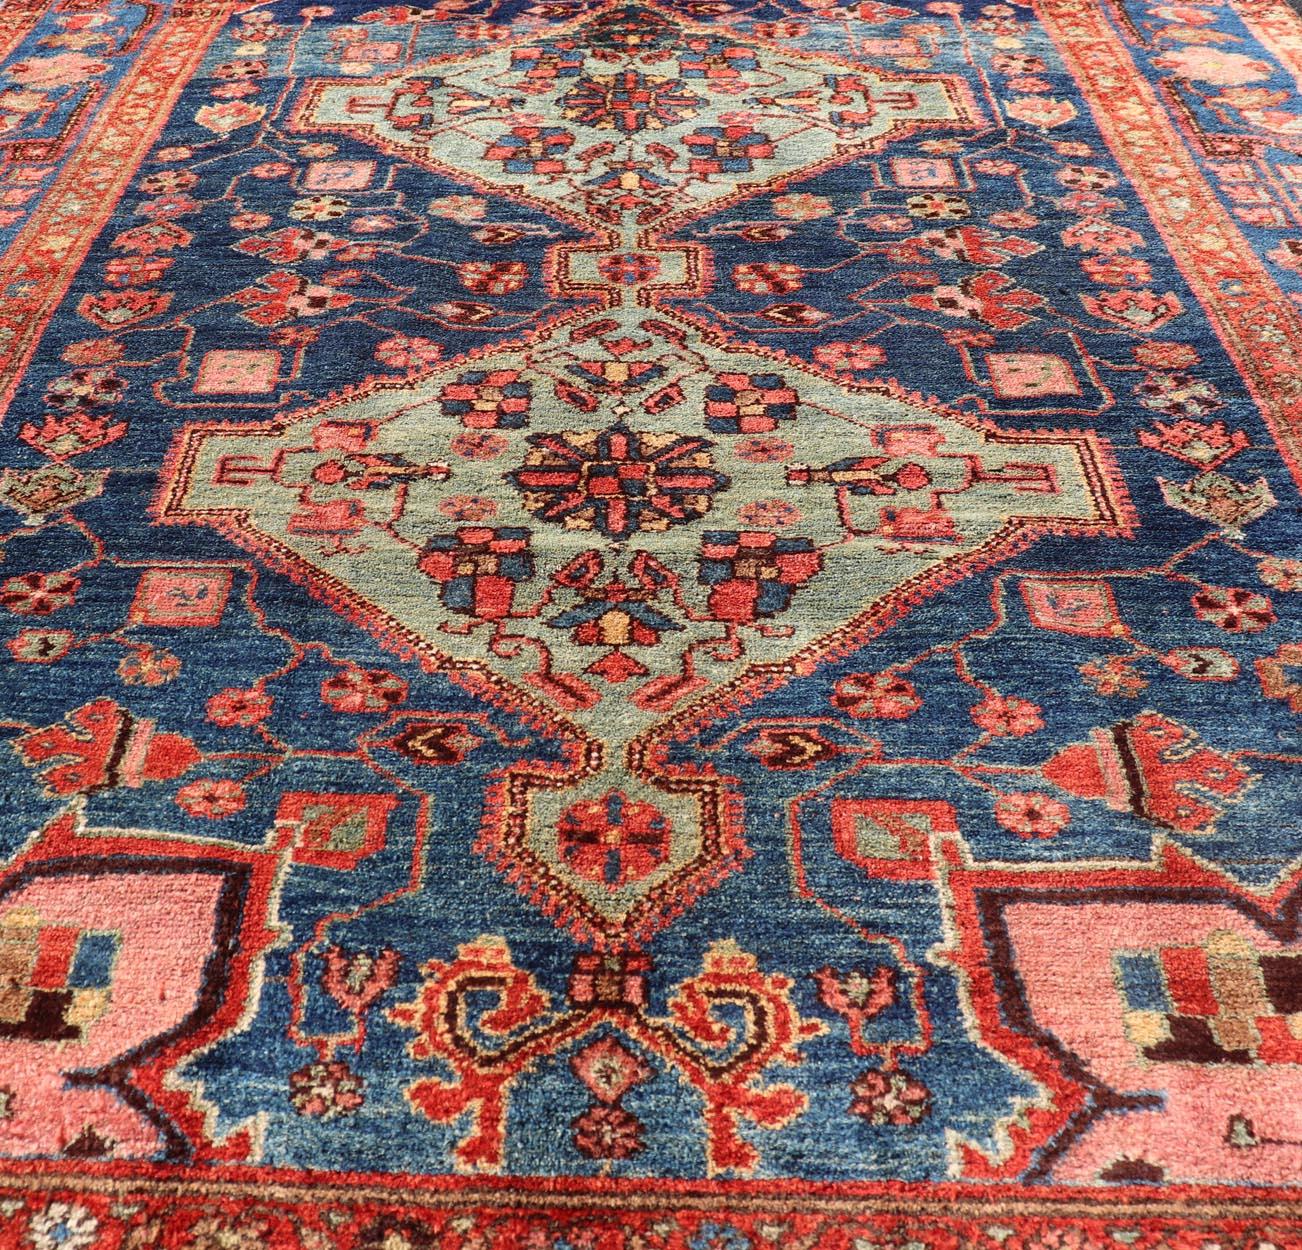 Antique Persian Karajeh Rug with Geometric Medallions in Green, Blue, and Red 1